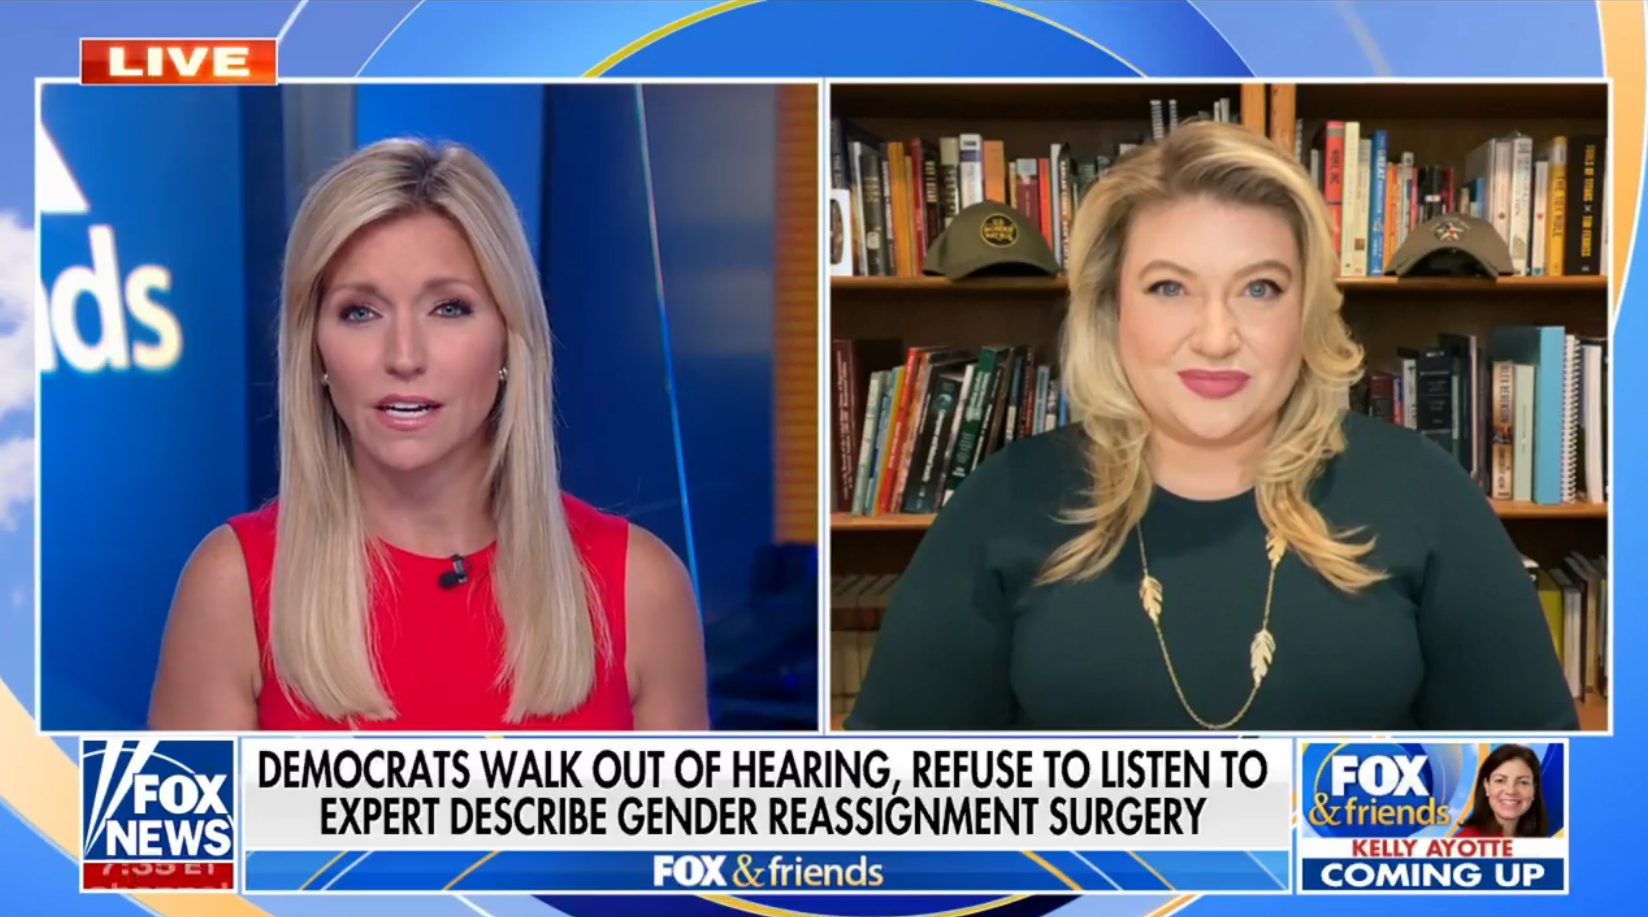 Kat Cammack shreds Dems for refusing to hear concerns about gender surgeries: 'A giant experiment'